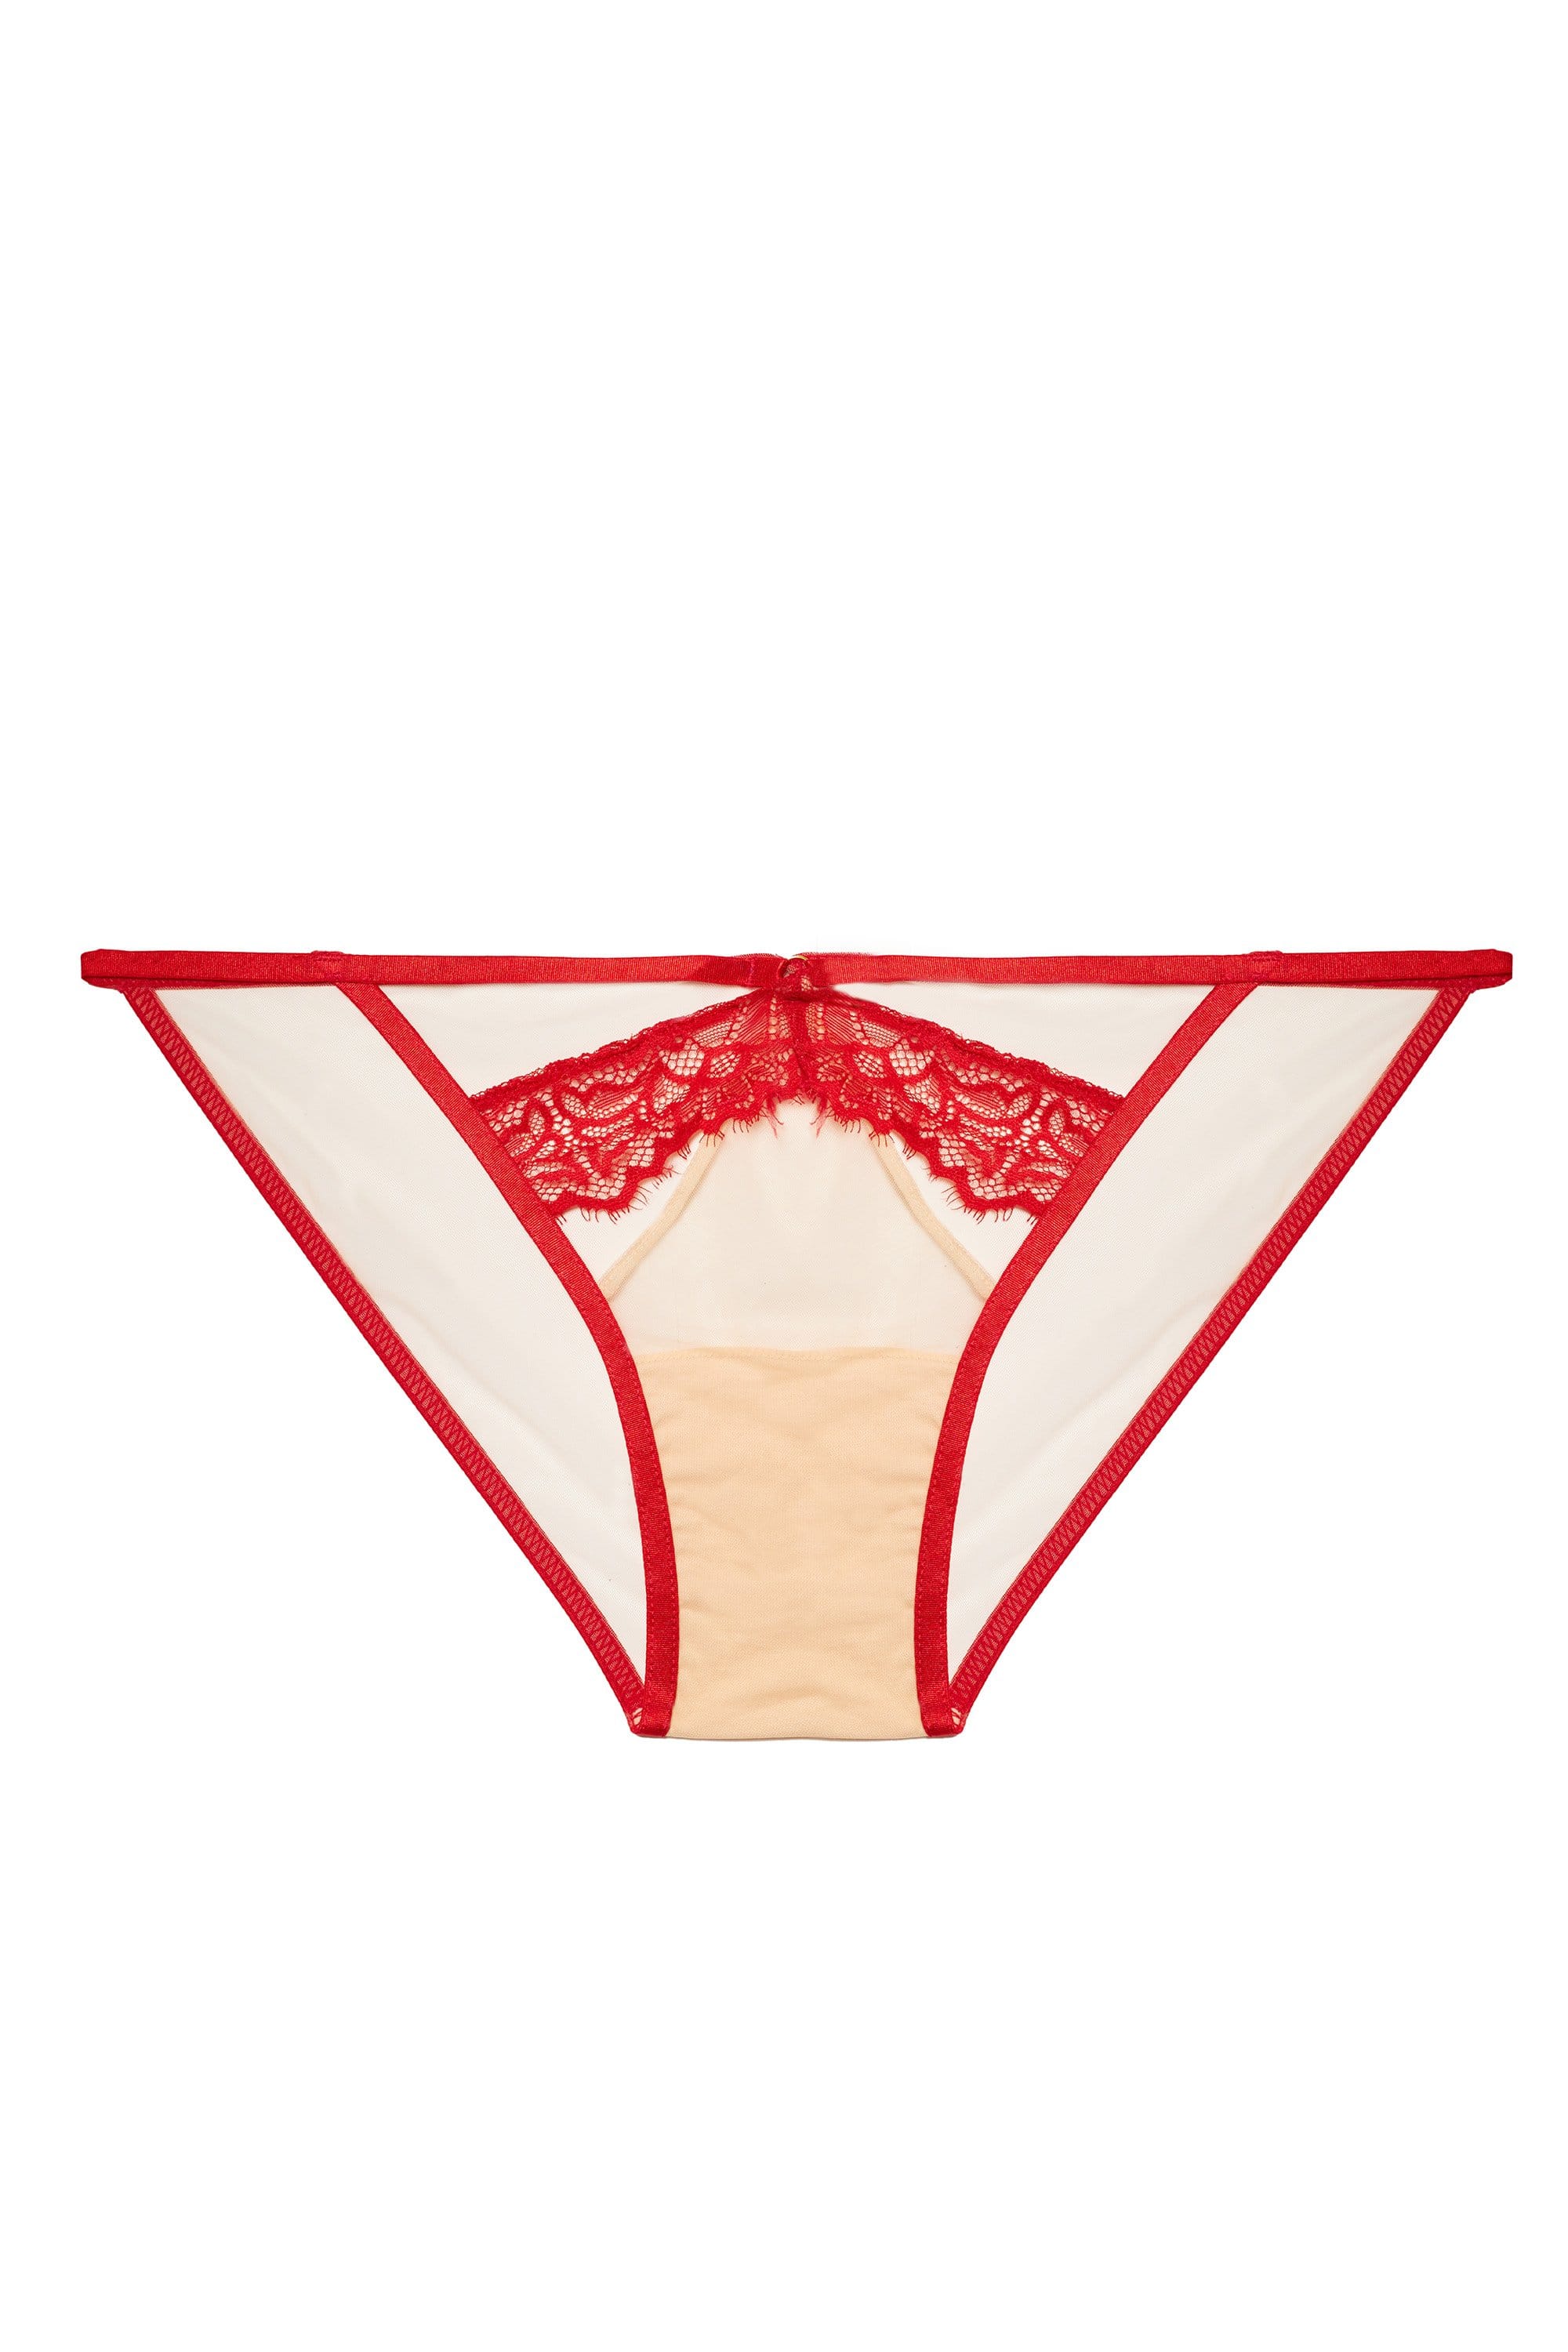 Mya Red Lace Brief